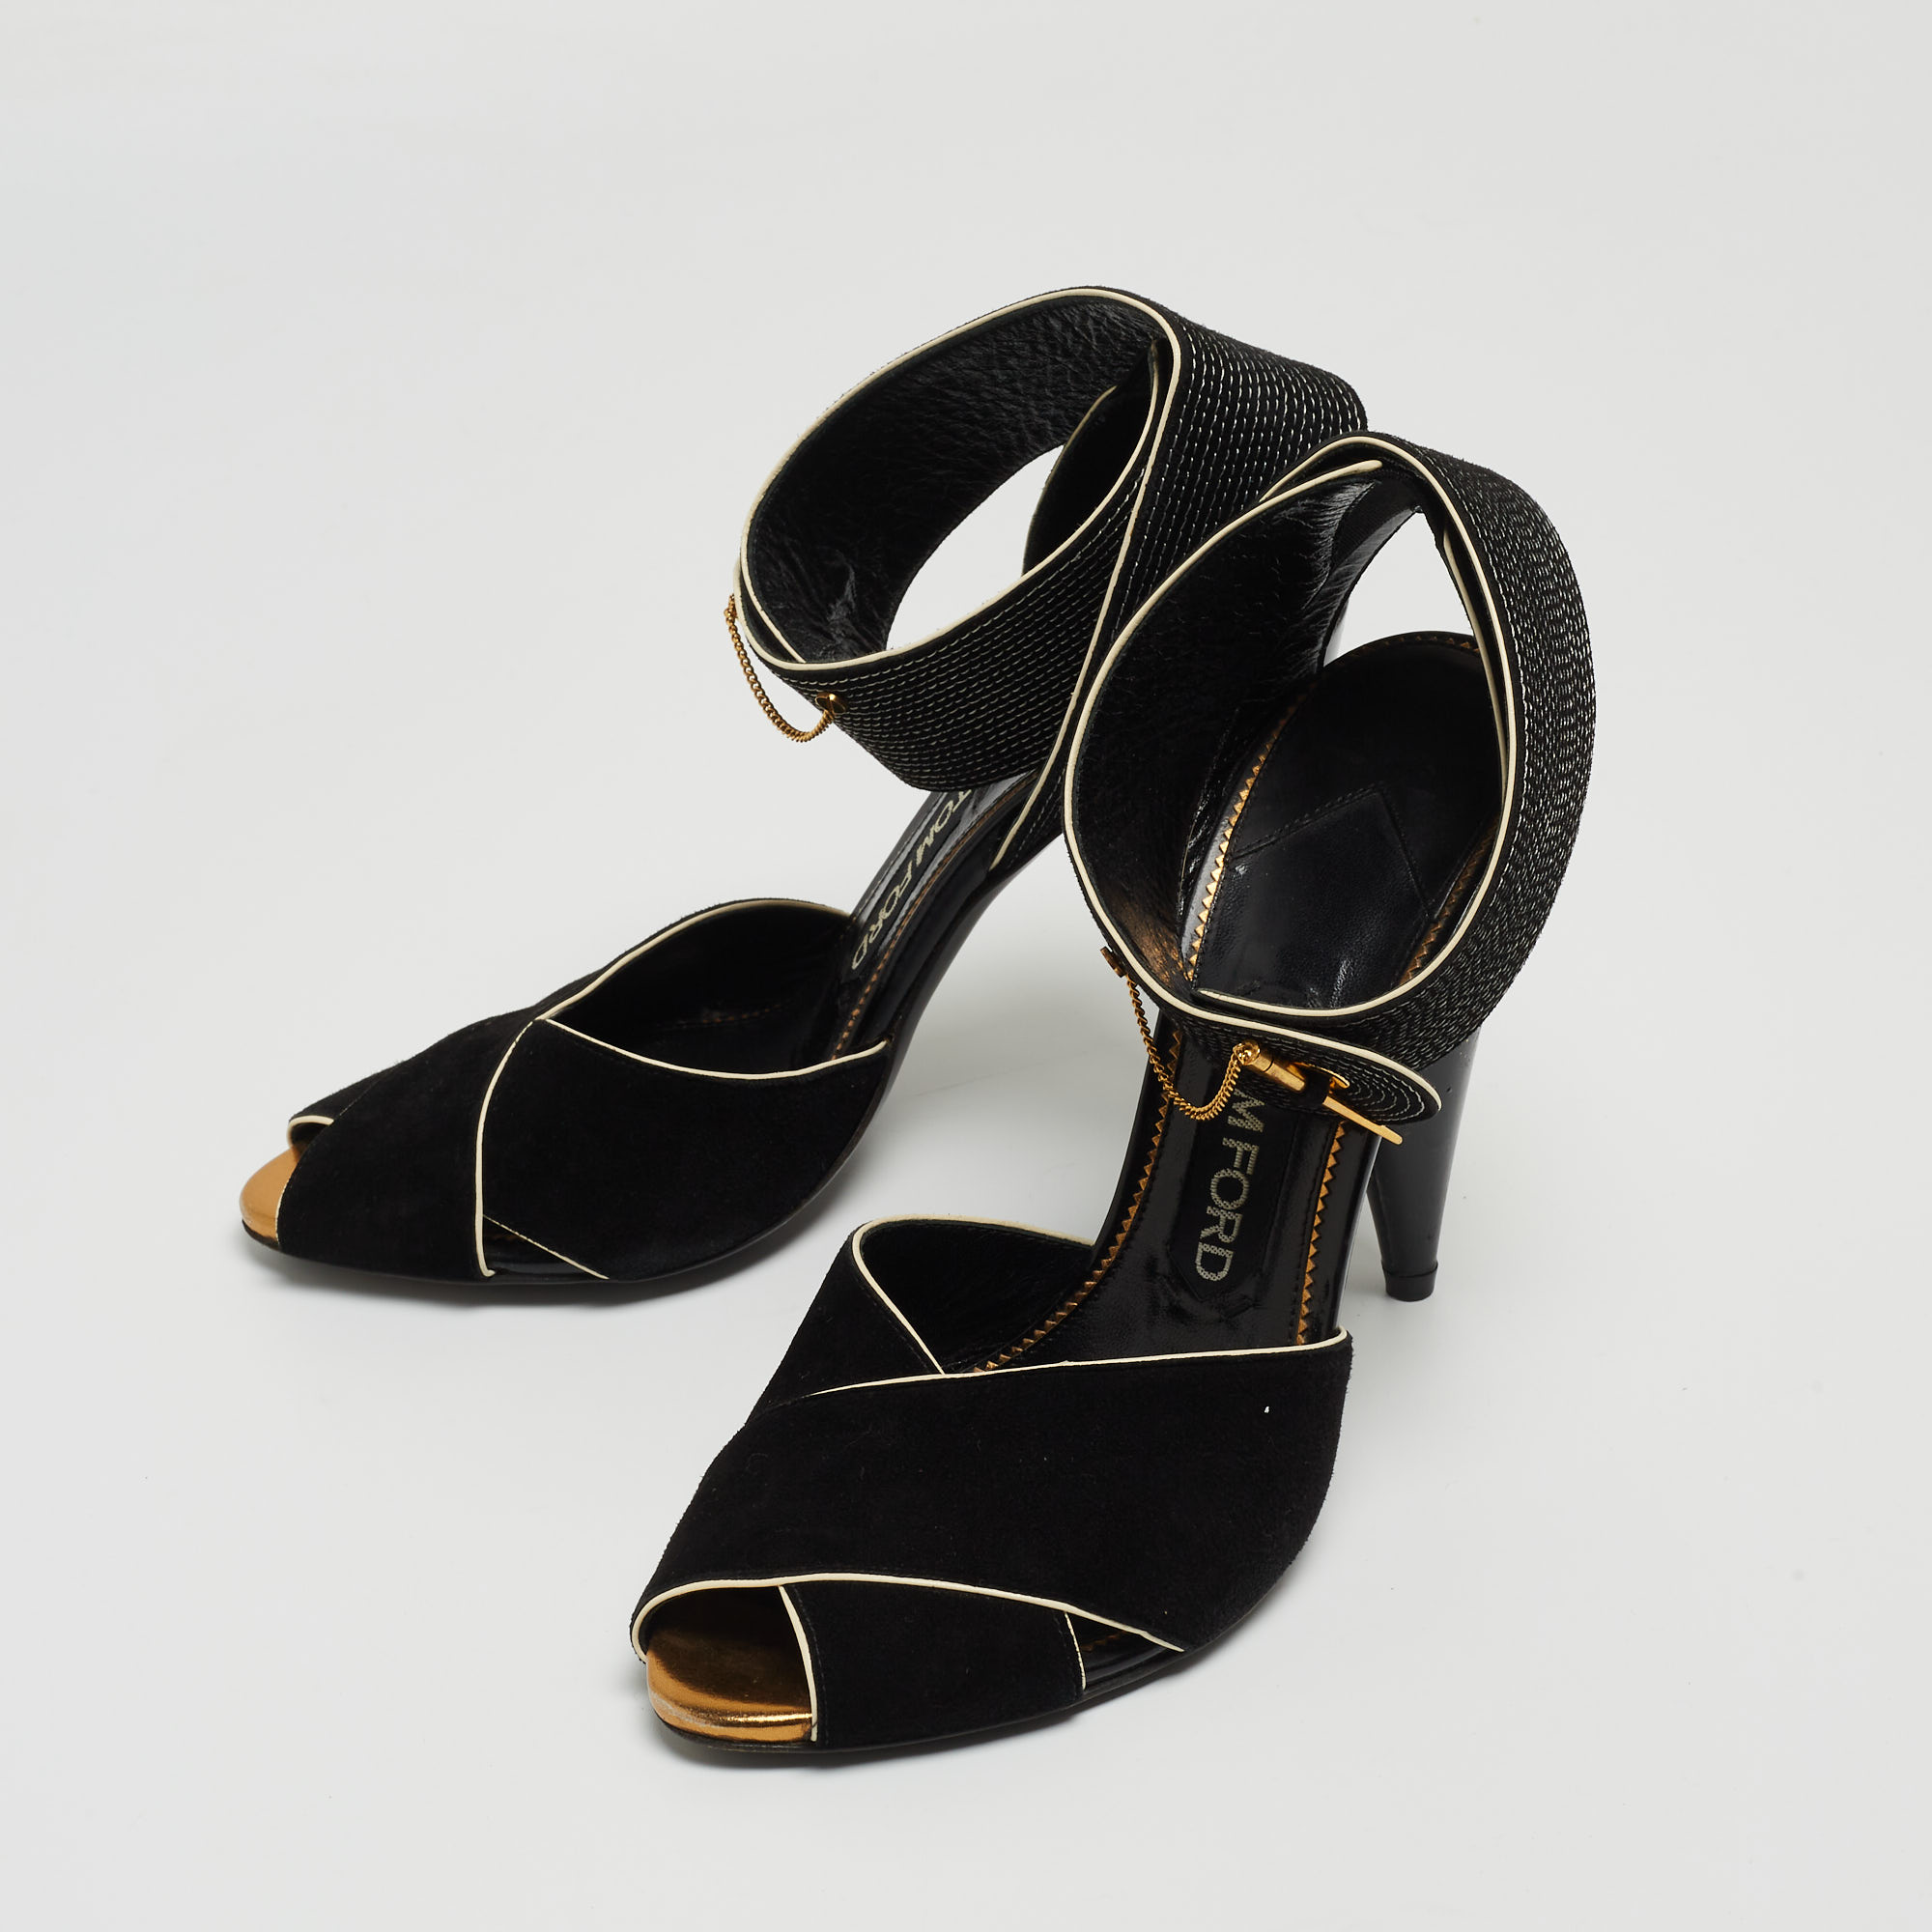 

Tom Ford Black Suede Ankle Wrap Crisscross Sandals Size